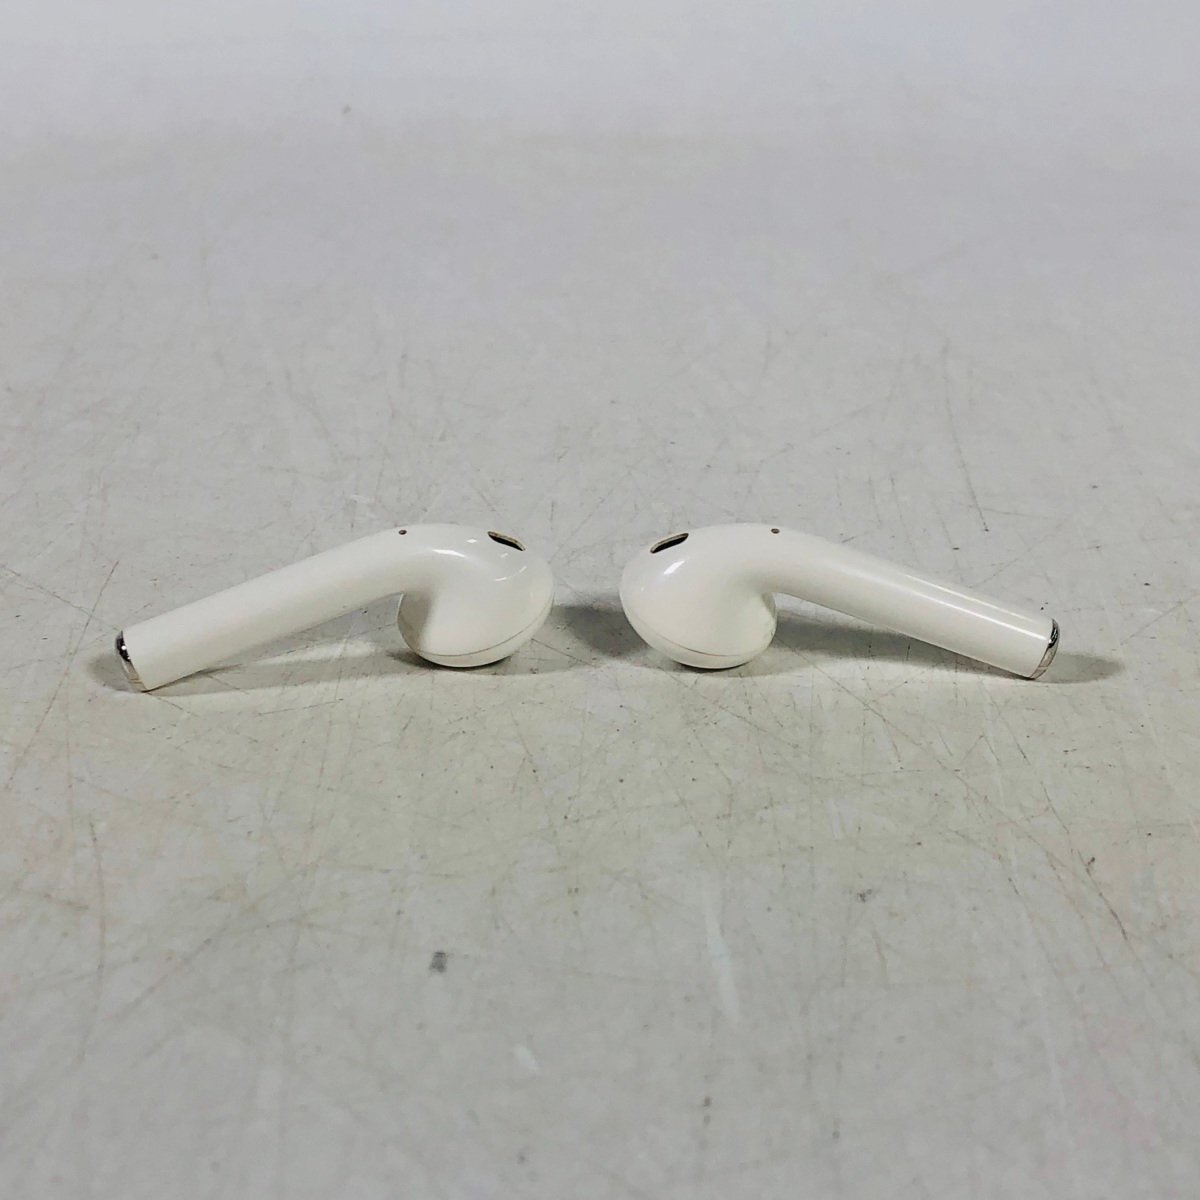 Apple AirPods with Charging Case MMEF2J/Aの画像3